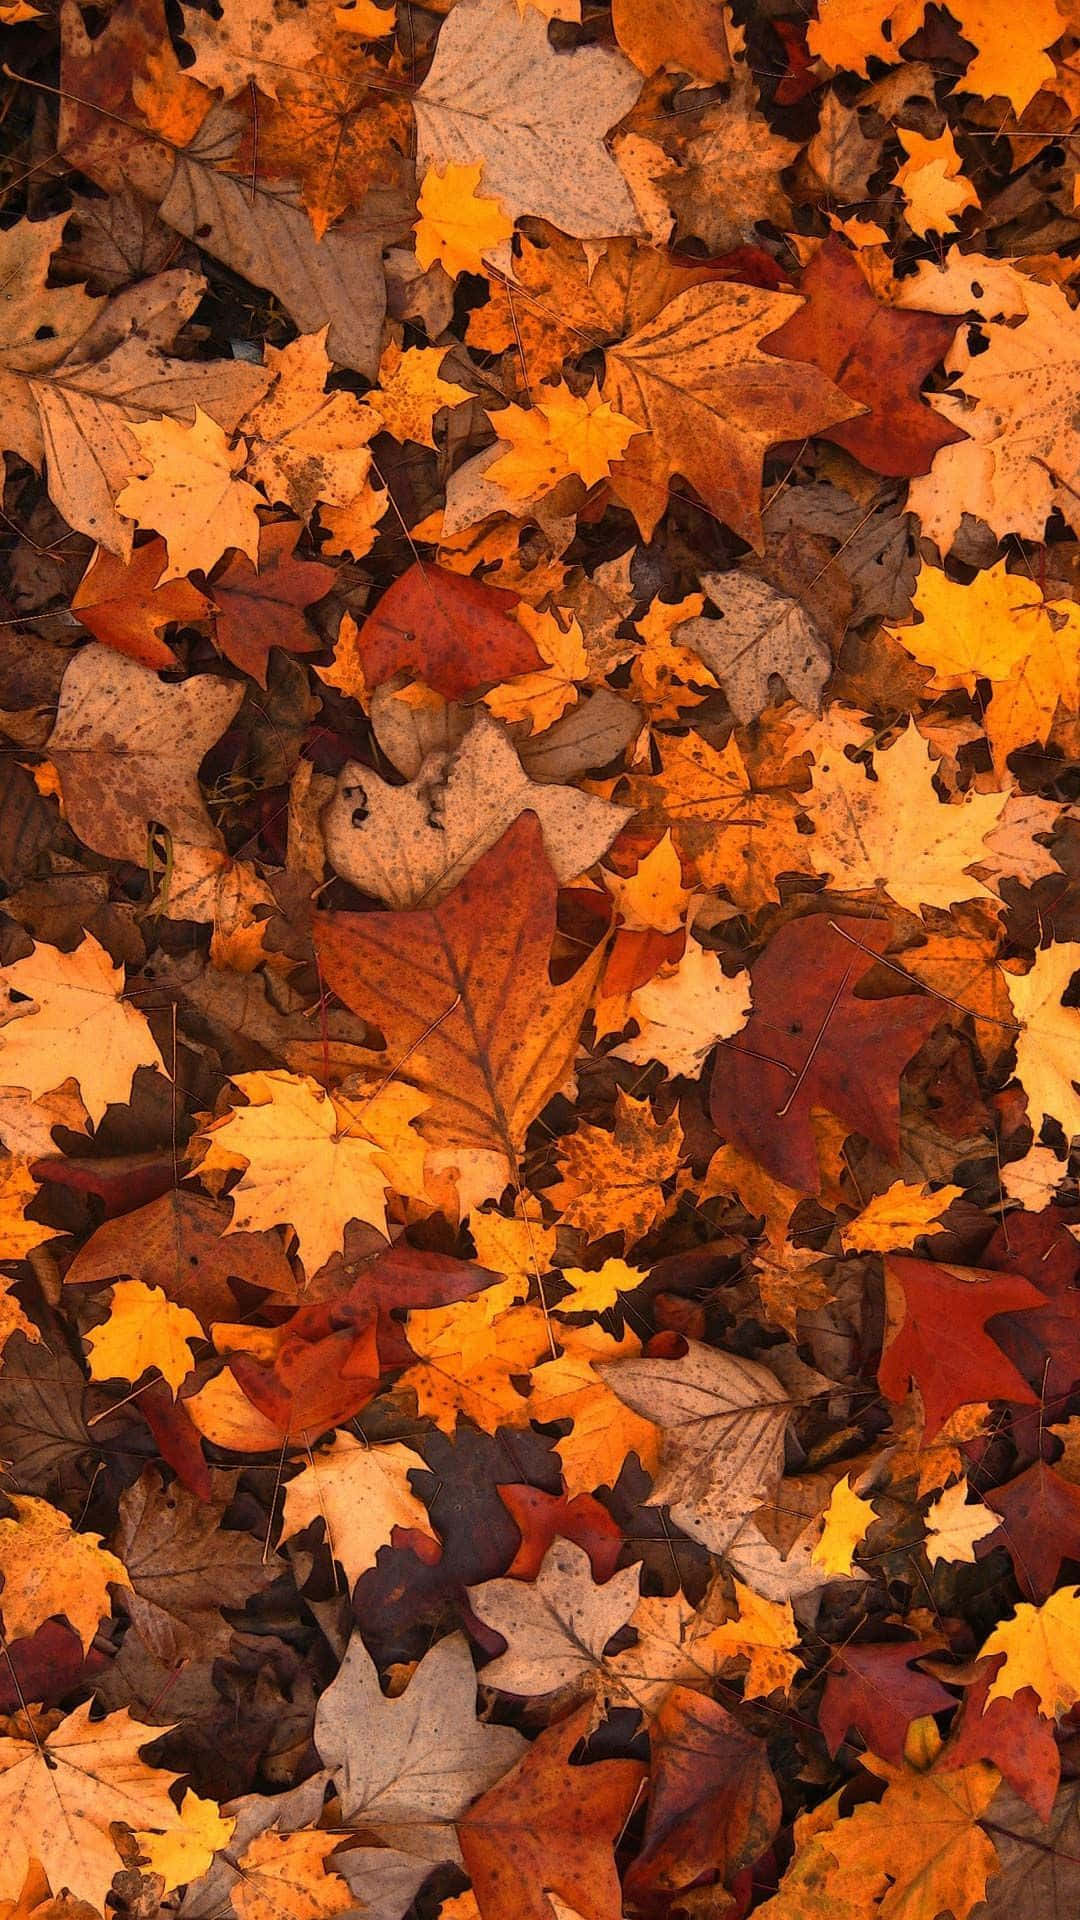 Enjoy the colorful beauty of Autumn with Autumn Leaves Phone Wallpaper